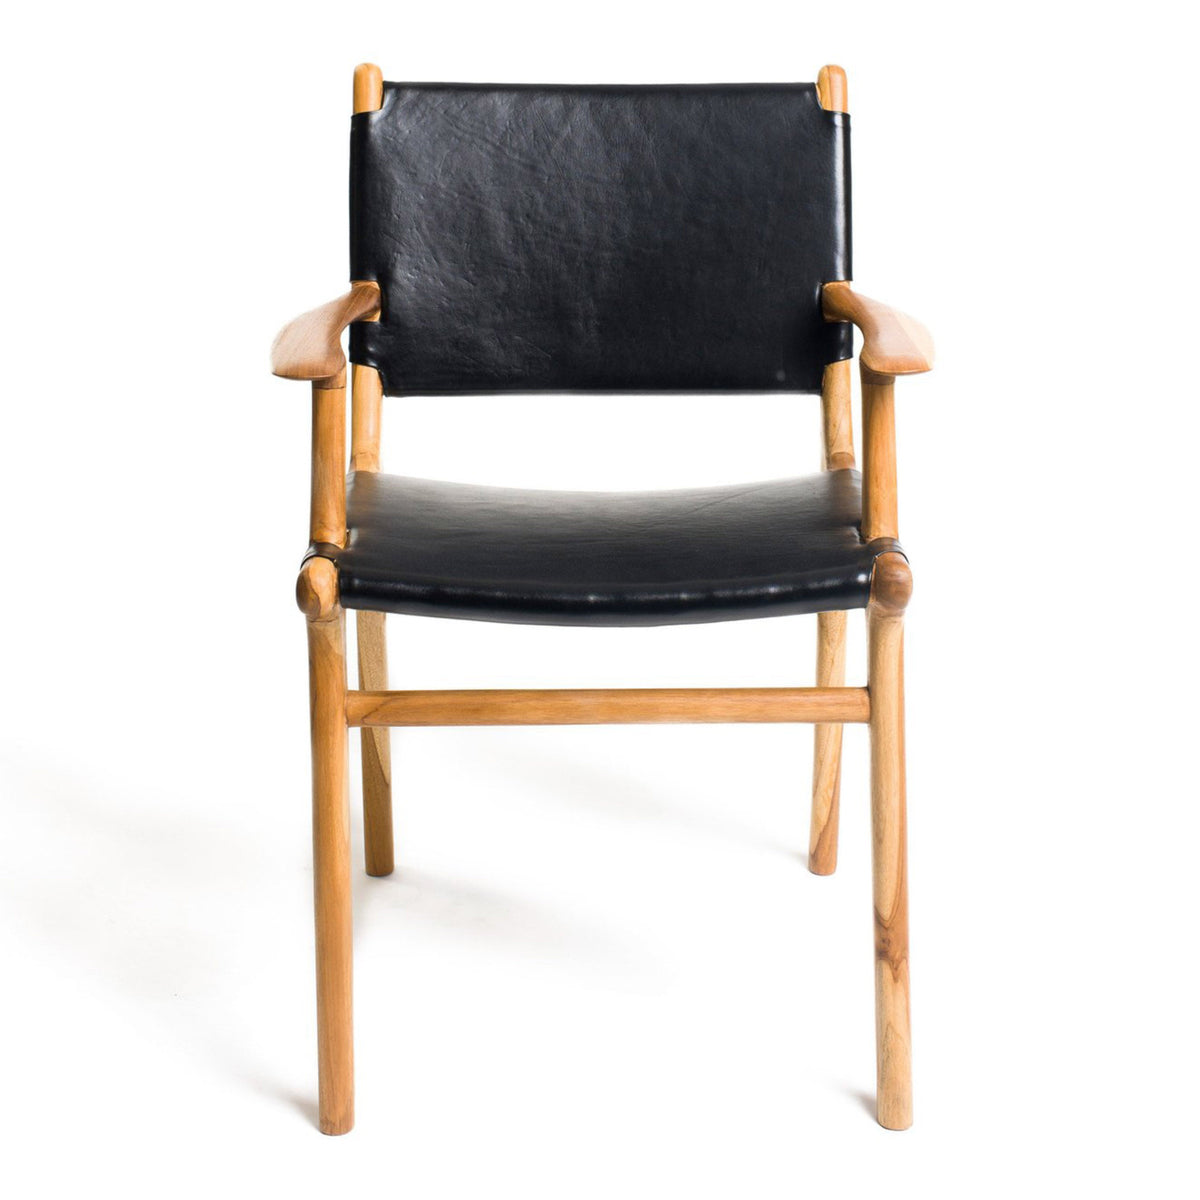 Clearance - Fenwick Dining Chair - Black